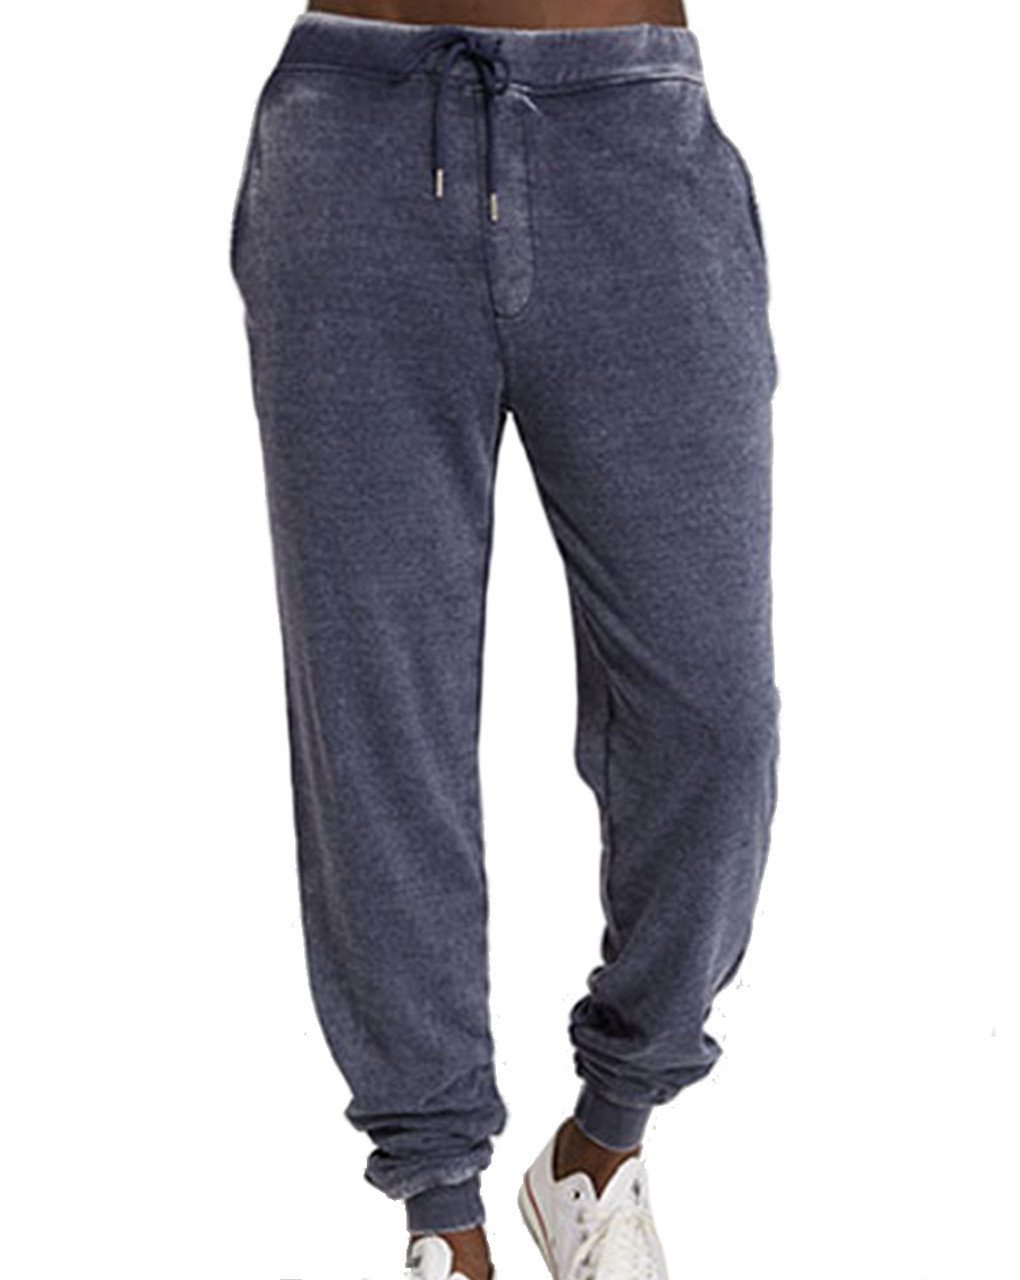 Burnout Wash Jogger Pant - Organic Cotton/Recycled Polyester Blend